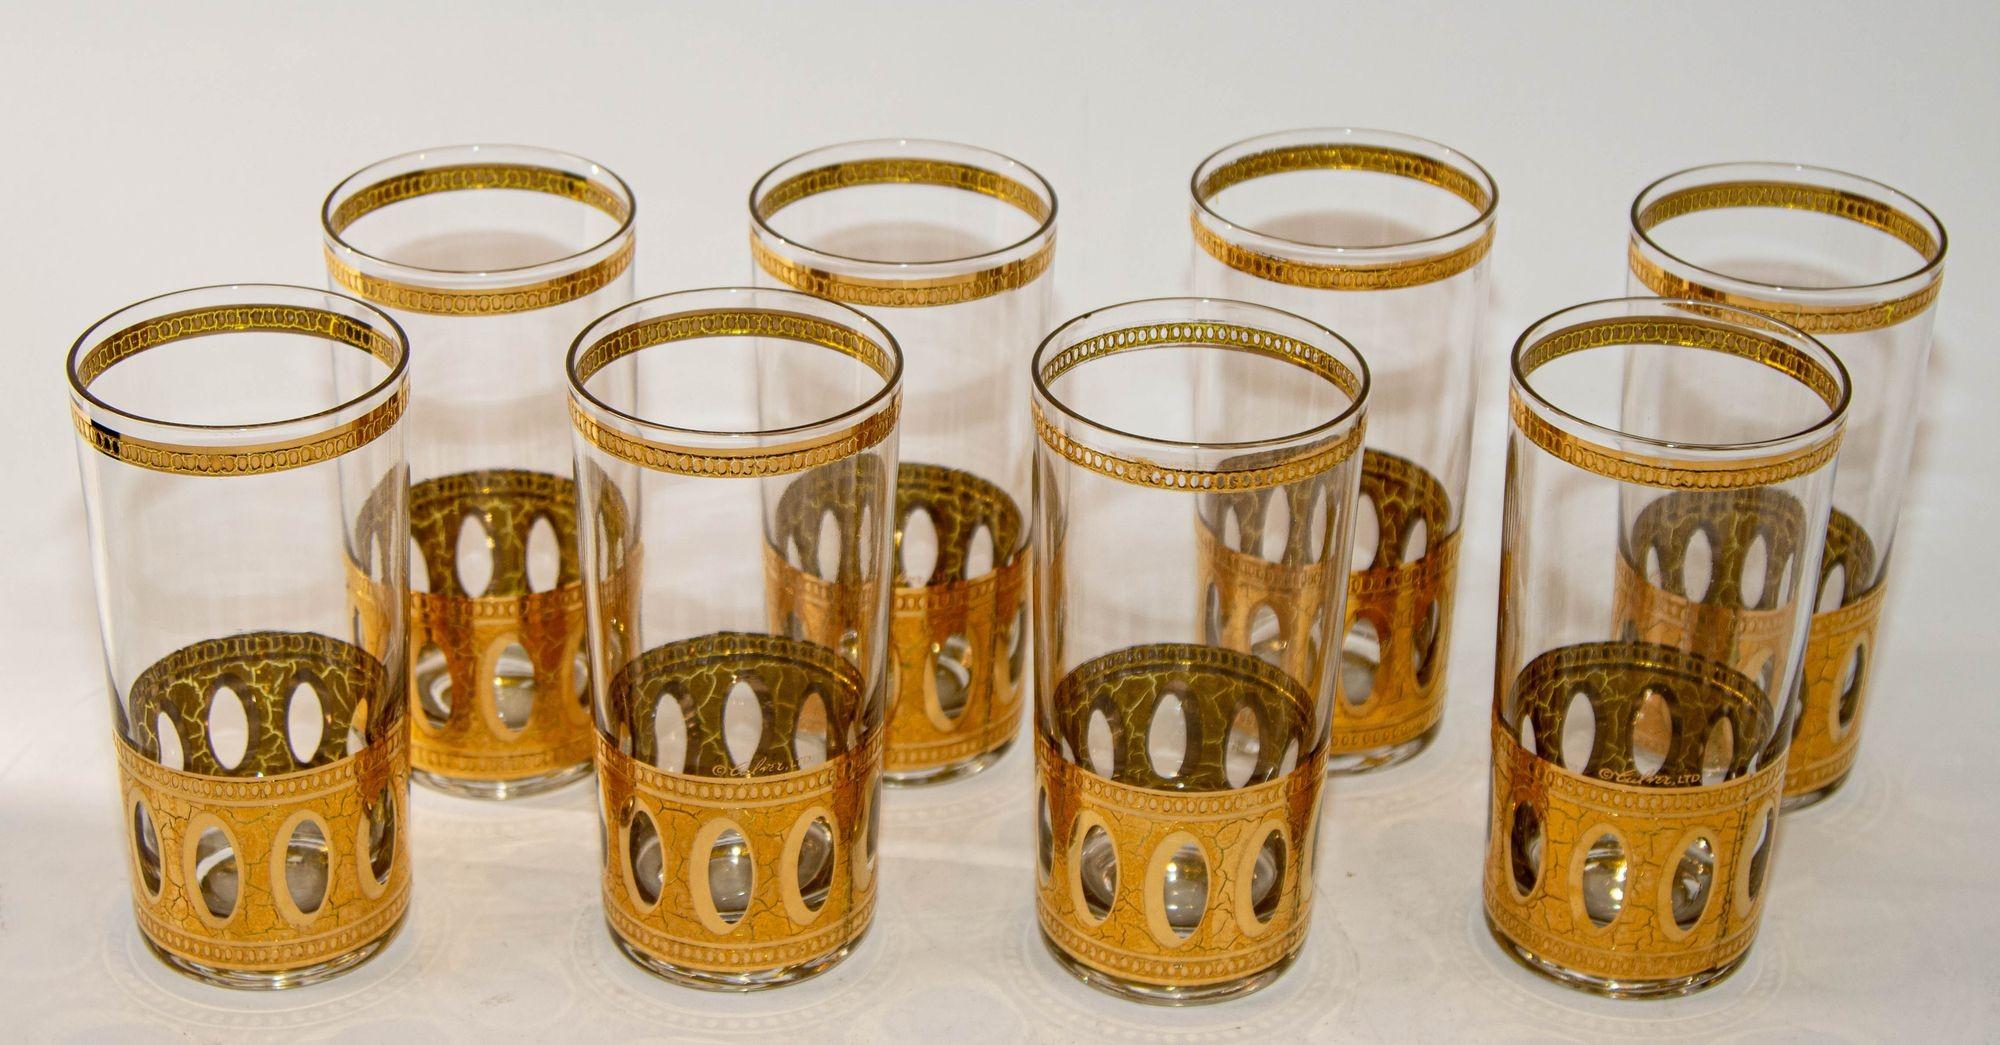 1950 Set of 8 Vintage Cver Ltd Highball Glasses with 22-Karat Gd Antigua Pattern.Very Mad Men style and perfect for today's cocktail bar.The Cver Ltd pattern is Antigua 22-karat gd, a perfect mid-century set to add to your barware clection.This